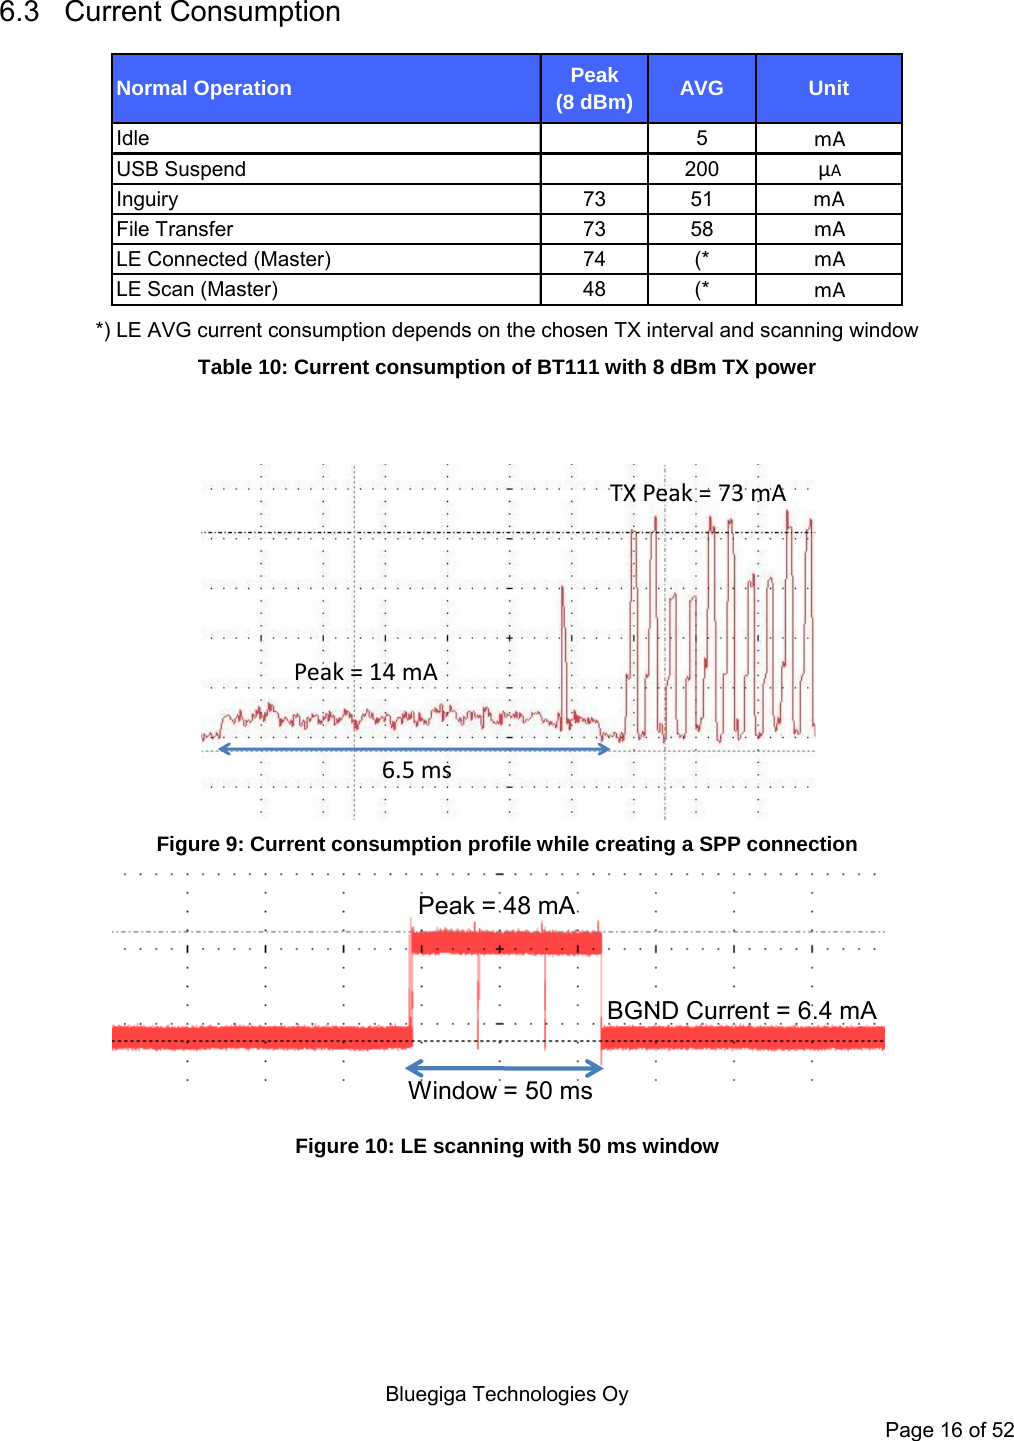    Bluegiga Technologies Oy Page 16 of 52 6.3 Current Consumption Normal Operation Peak (8 dBm) AVG UnitIdle 5 mAUSB Suspend 200µAInguiry 73 51mAFile Transfer 73 58mALE Connected (Master) 74 (*mALE Scan (Master) 48 (*mA *) LE AVG current consumption depends on the chosen TX interval and scanning window Table 10: Current consumption of BT111 with 8 dBm TX power   6.5 msTX Peak = 73 mAPeak = 14 mA Figure 9: Current consumption profile while creating a SPP connection Peak = 48 mABGND Current = 6.4 mAWindow = 50 ms Figure 10: LE scanning with 50 ms window 